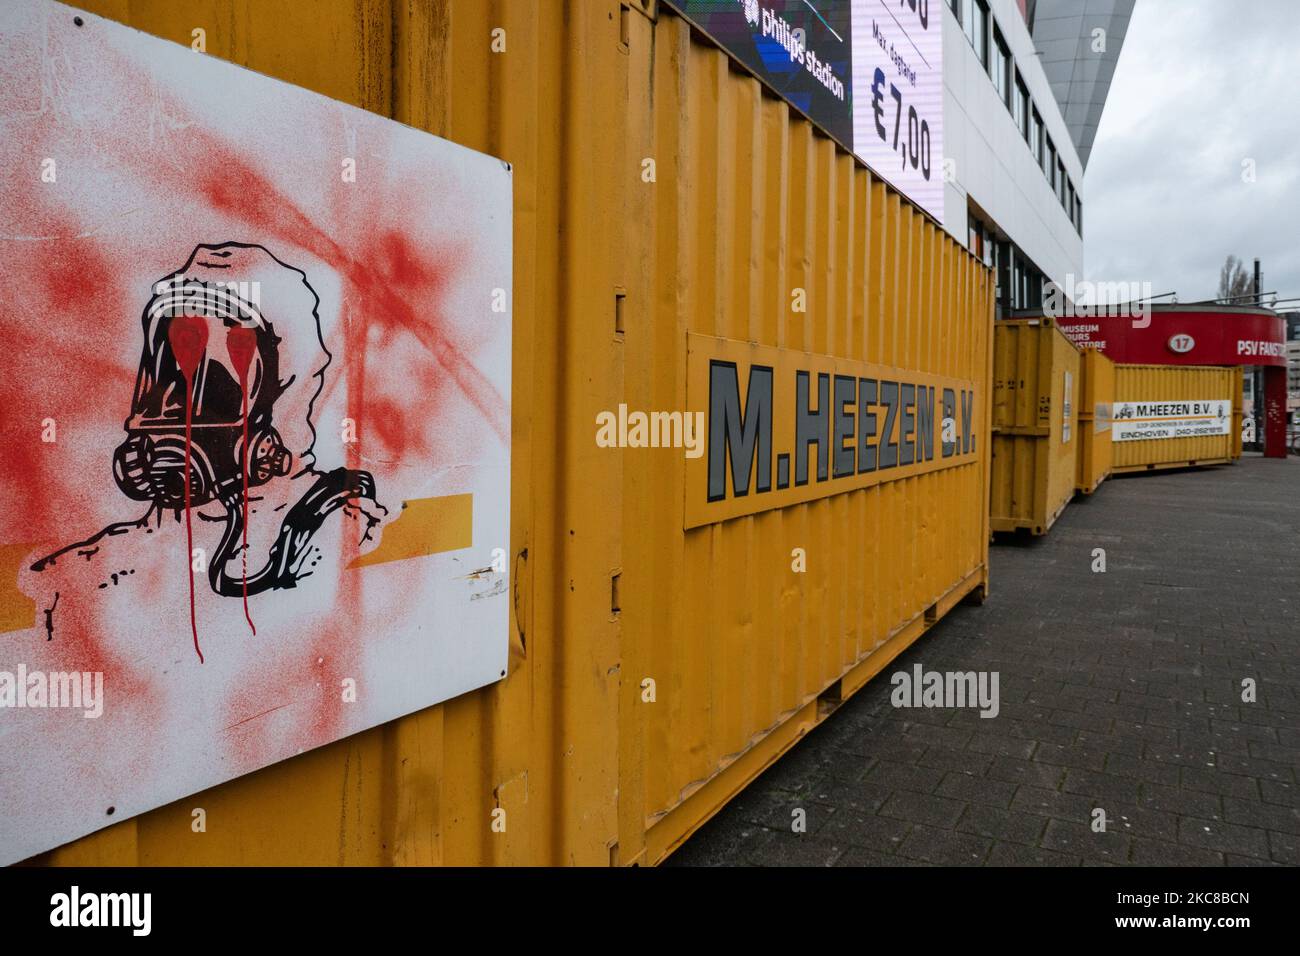 A sign of a man with chemical protection mask as seen vandalized with graffiti on the containers. The Philips Stadion, PSV club stadium in the Dutch city of Eindhoven is barricaded with shipping containers to protect the building, the museum, fanstore, multiple gates, trackside and supporters home side from riots and looting as happened previously in the city. The fortification and sealing of the front side of the stadium took place after the club received some threats according to the local media. Eindhoven faced some violent clashes during an anti-lockdown / anti-curfew protest that turned i Stock Photo